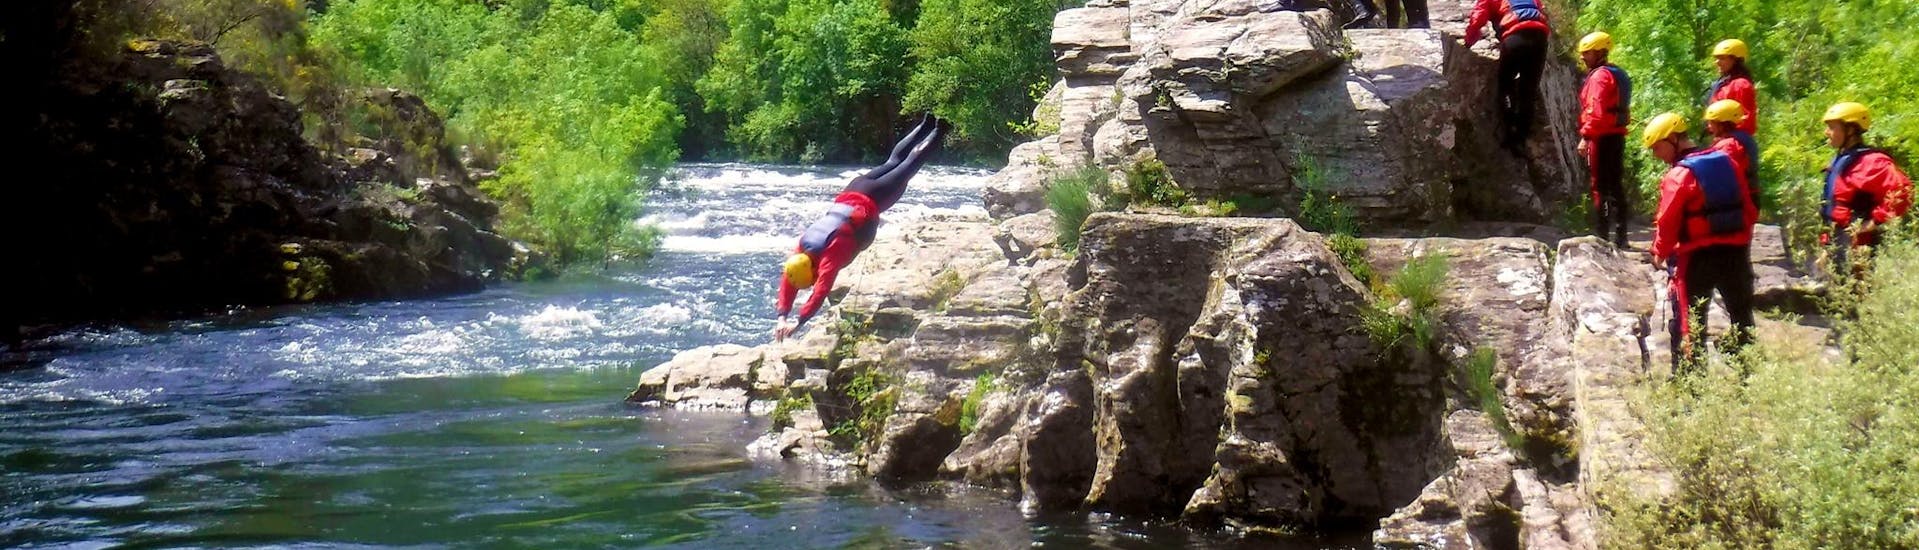 A participant of the Easy River Trekking in Rio Paiva in Arouca Geopark with Clube do Paiva is cliffjumping into the cool water of the river.